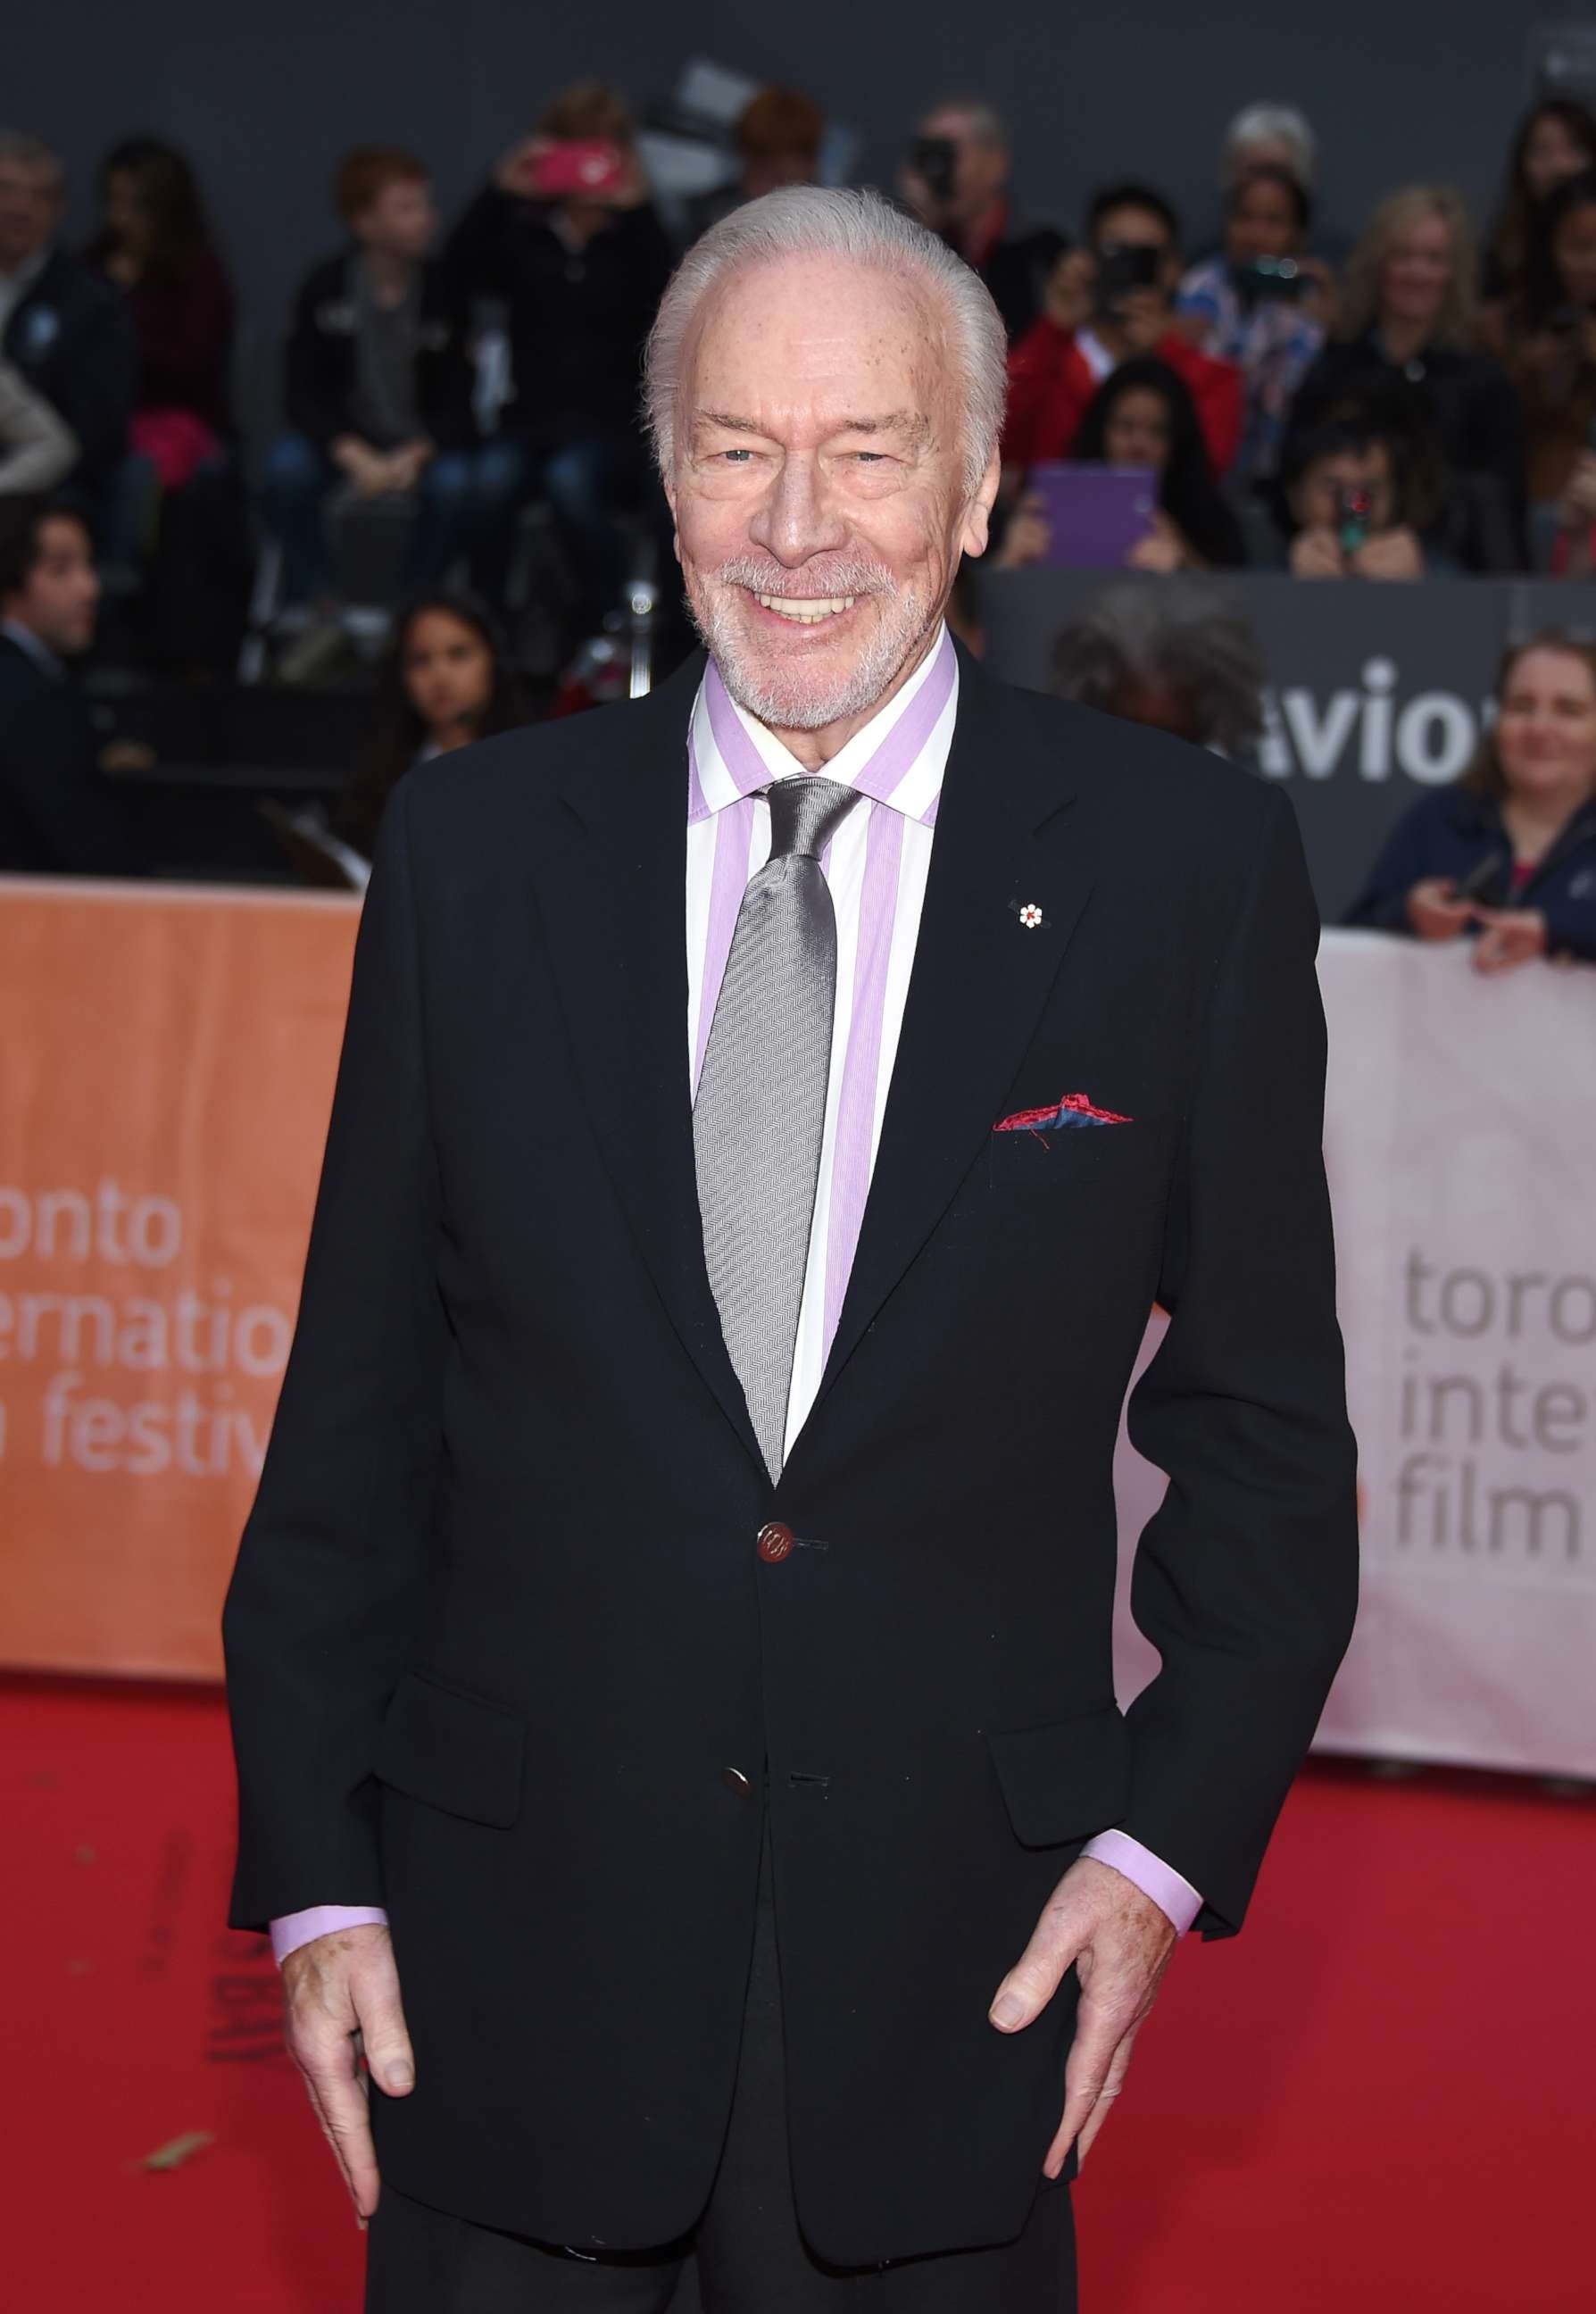 PHOTO: Christopher Plummer attends the "Remember" premiere during the 2015 Toronto International Film Festival at Roy Thomson Hall on Sept. 12, 2015 in Toronto.